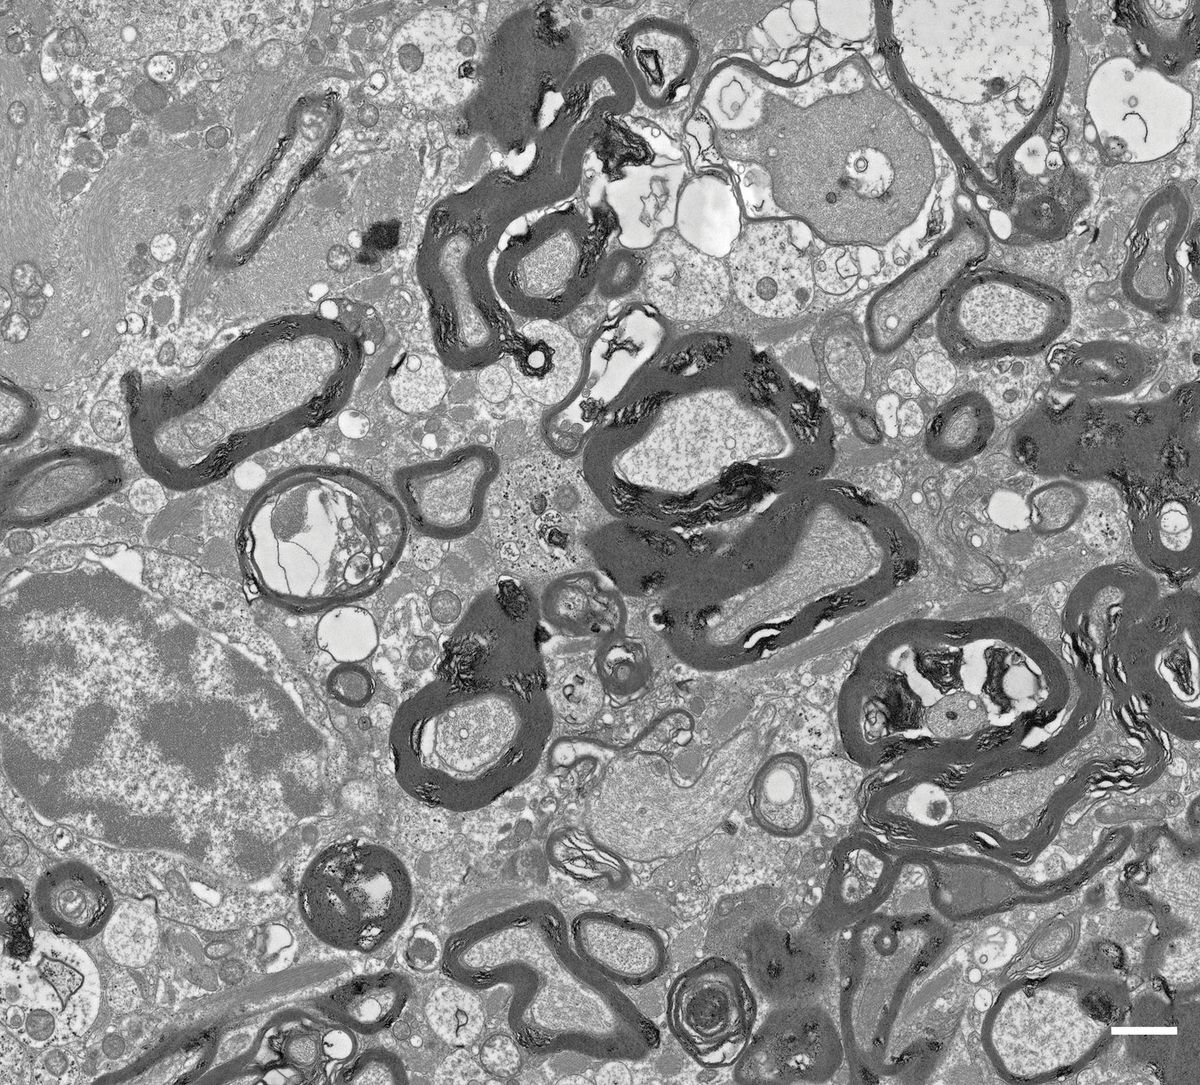 Electron microscopy shows myelin overgrowth around axons in the white matter of a patient with ALSP.